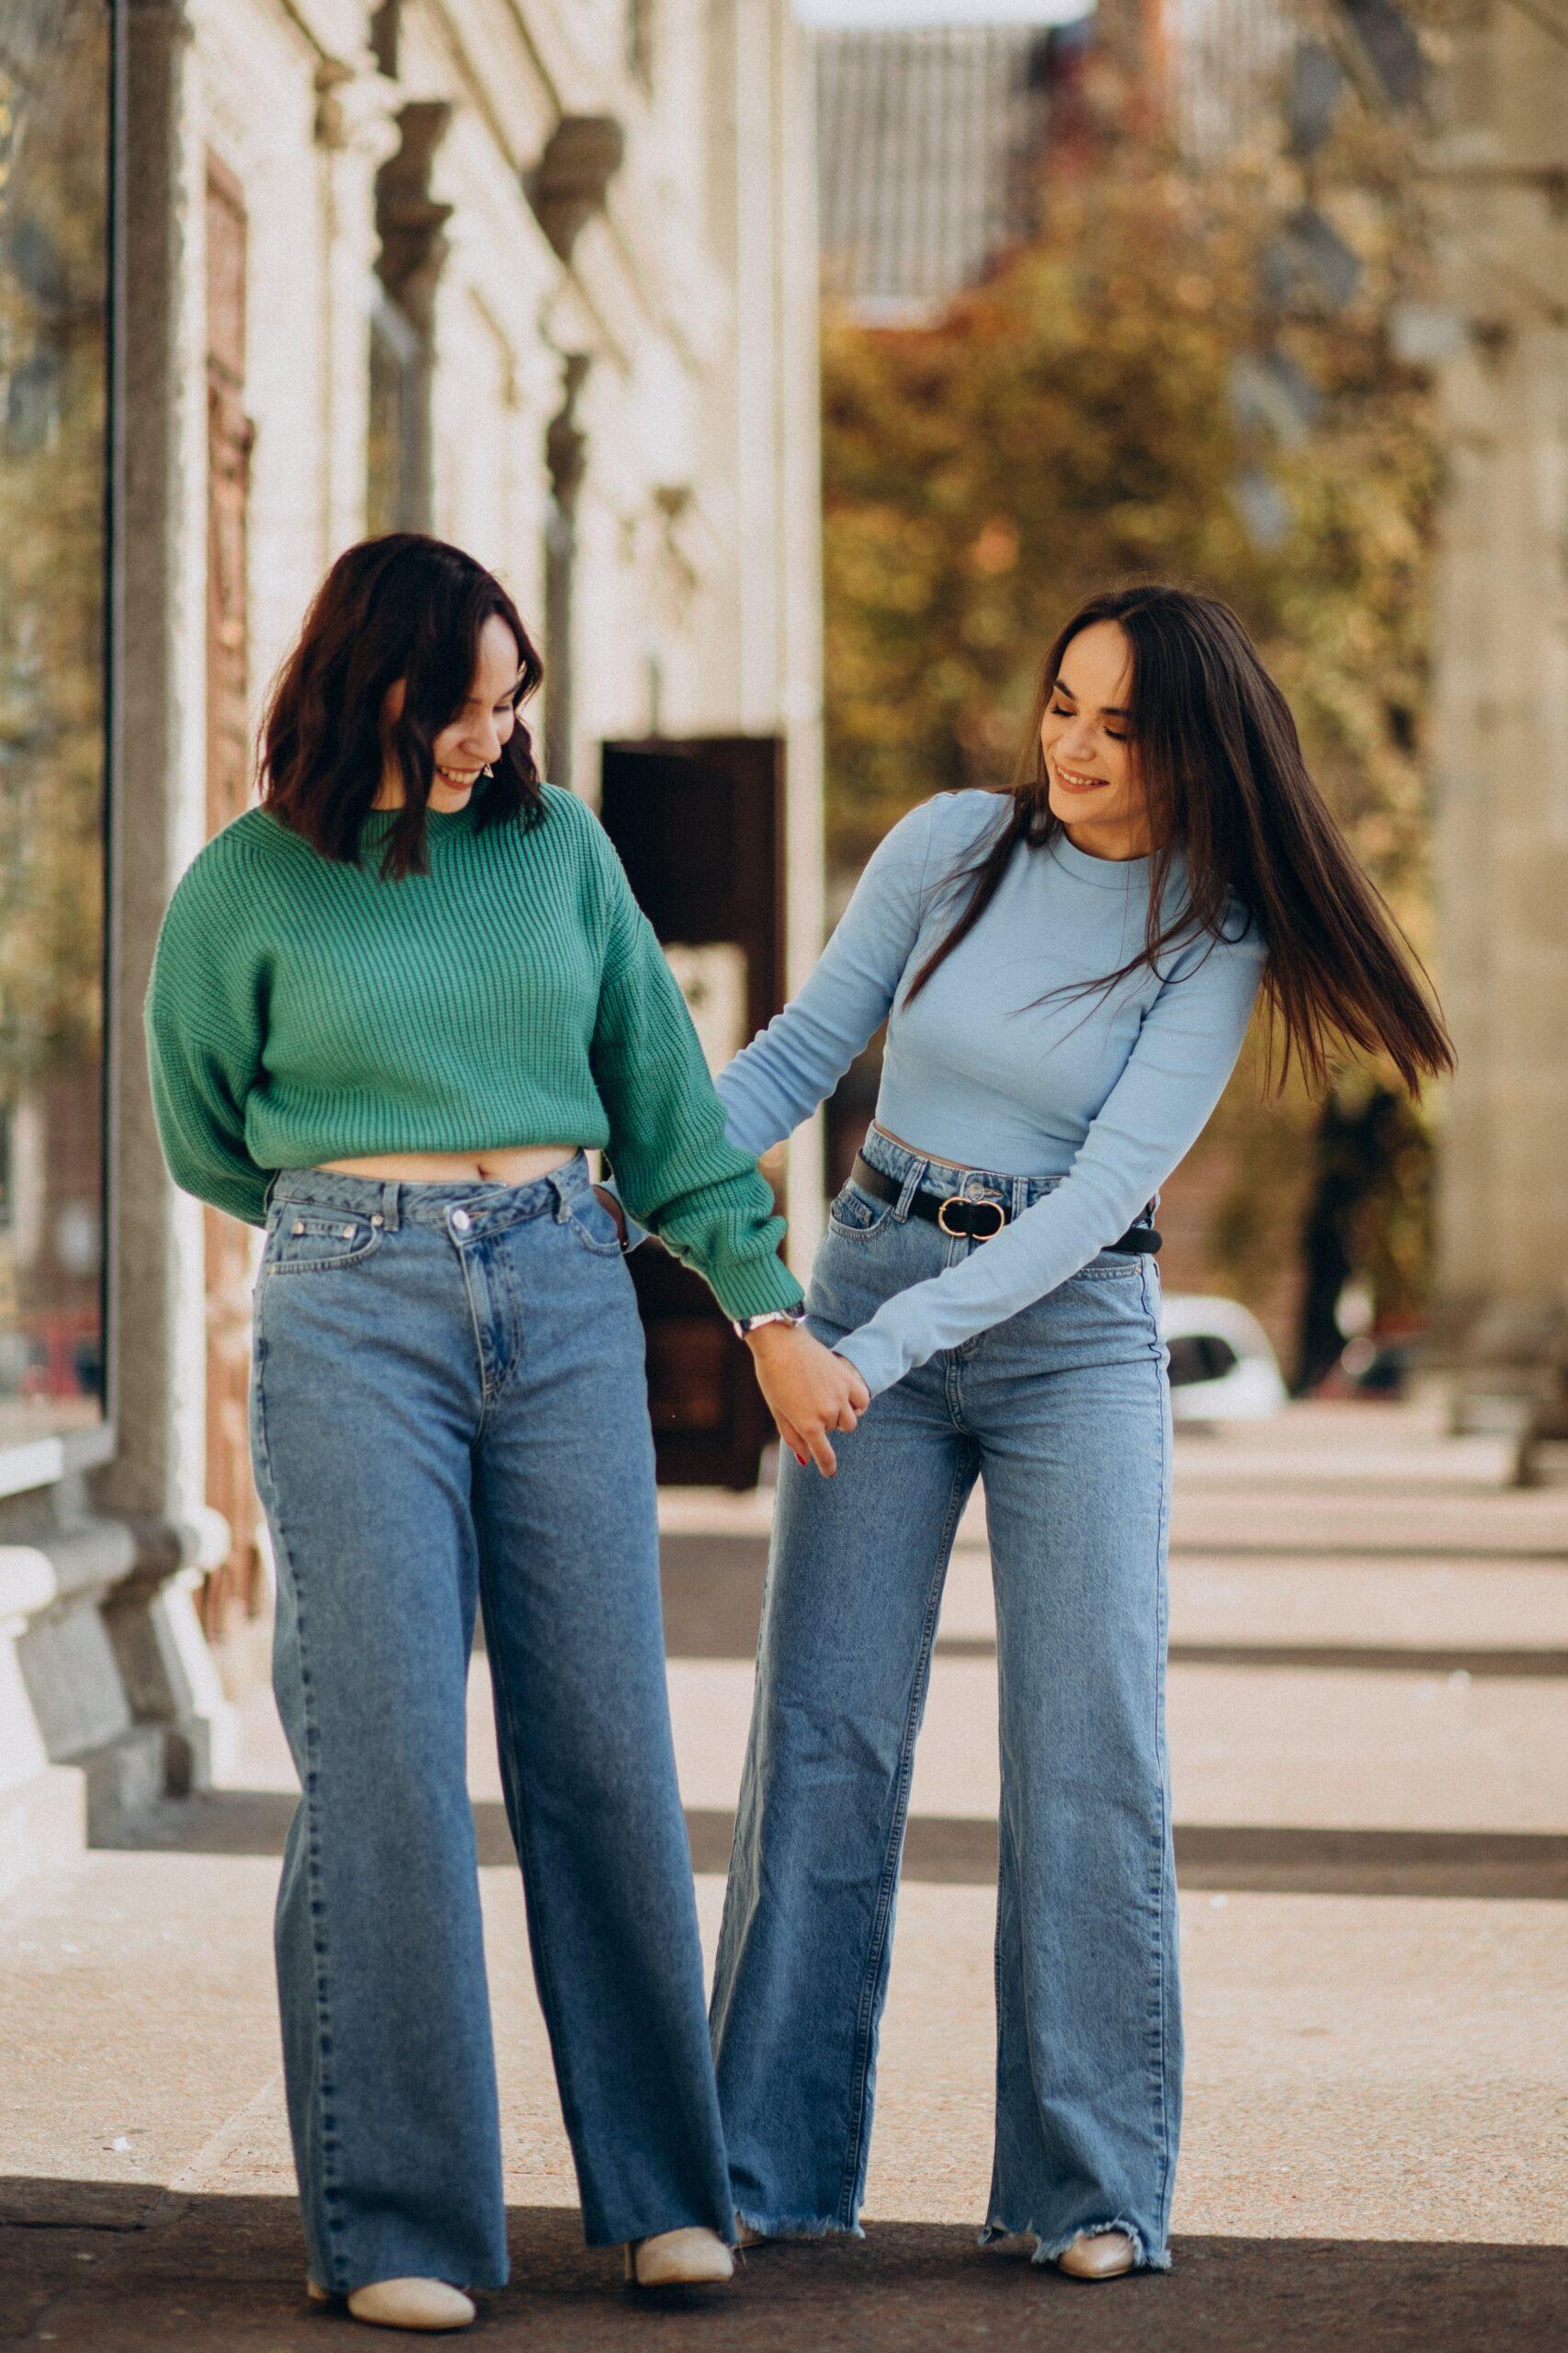 Why Are High Waisted Jeans Popular? 5 Key Reasons